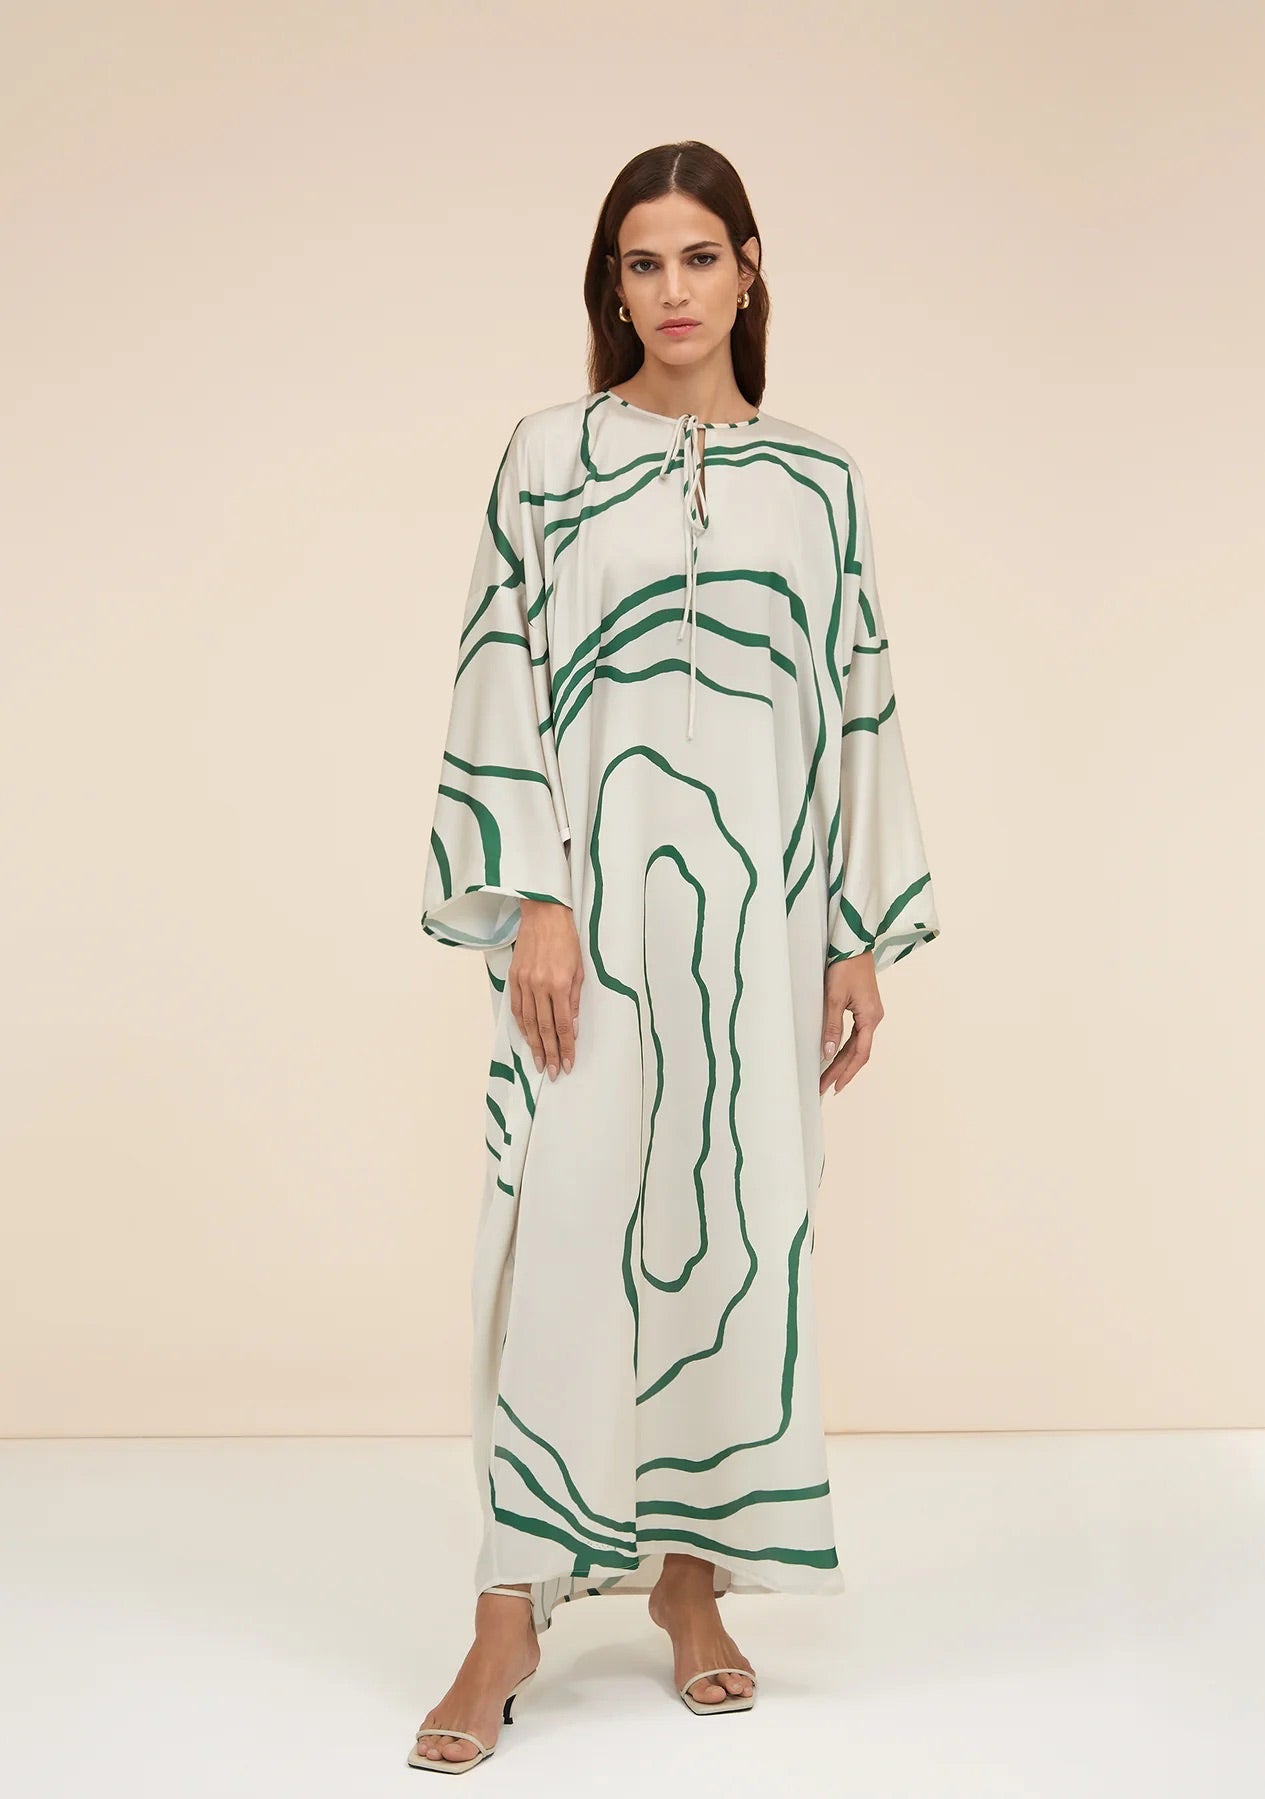 Abstract pattern kaftan in various colors, showcasing elegant style and comfortable design, ideal for a sophisticated wardrobe addition